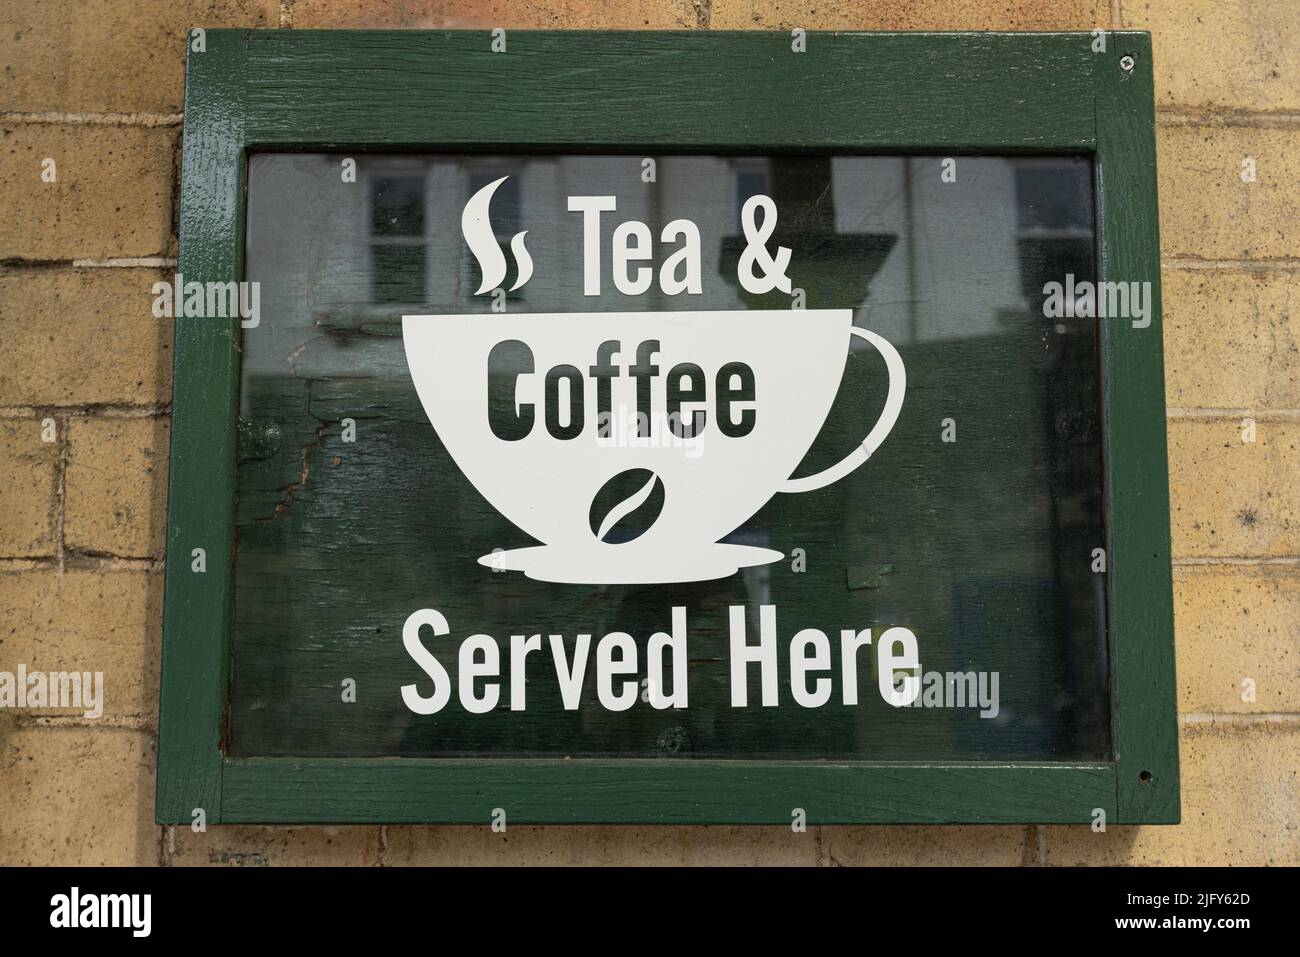 Green tea and coffee served here sign hanging on a wall at knaresborough railway station North Yorkshire, UK Stock Photo